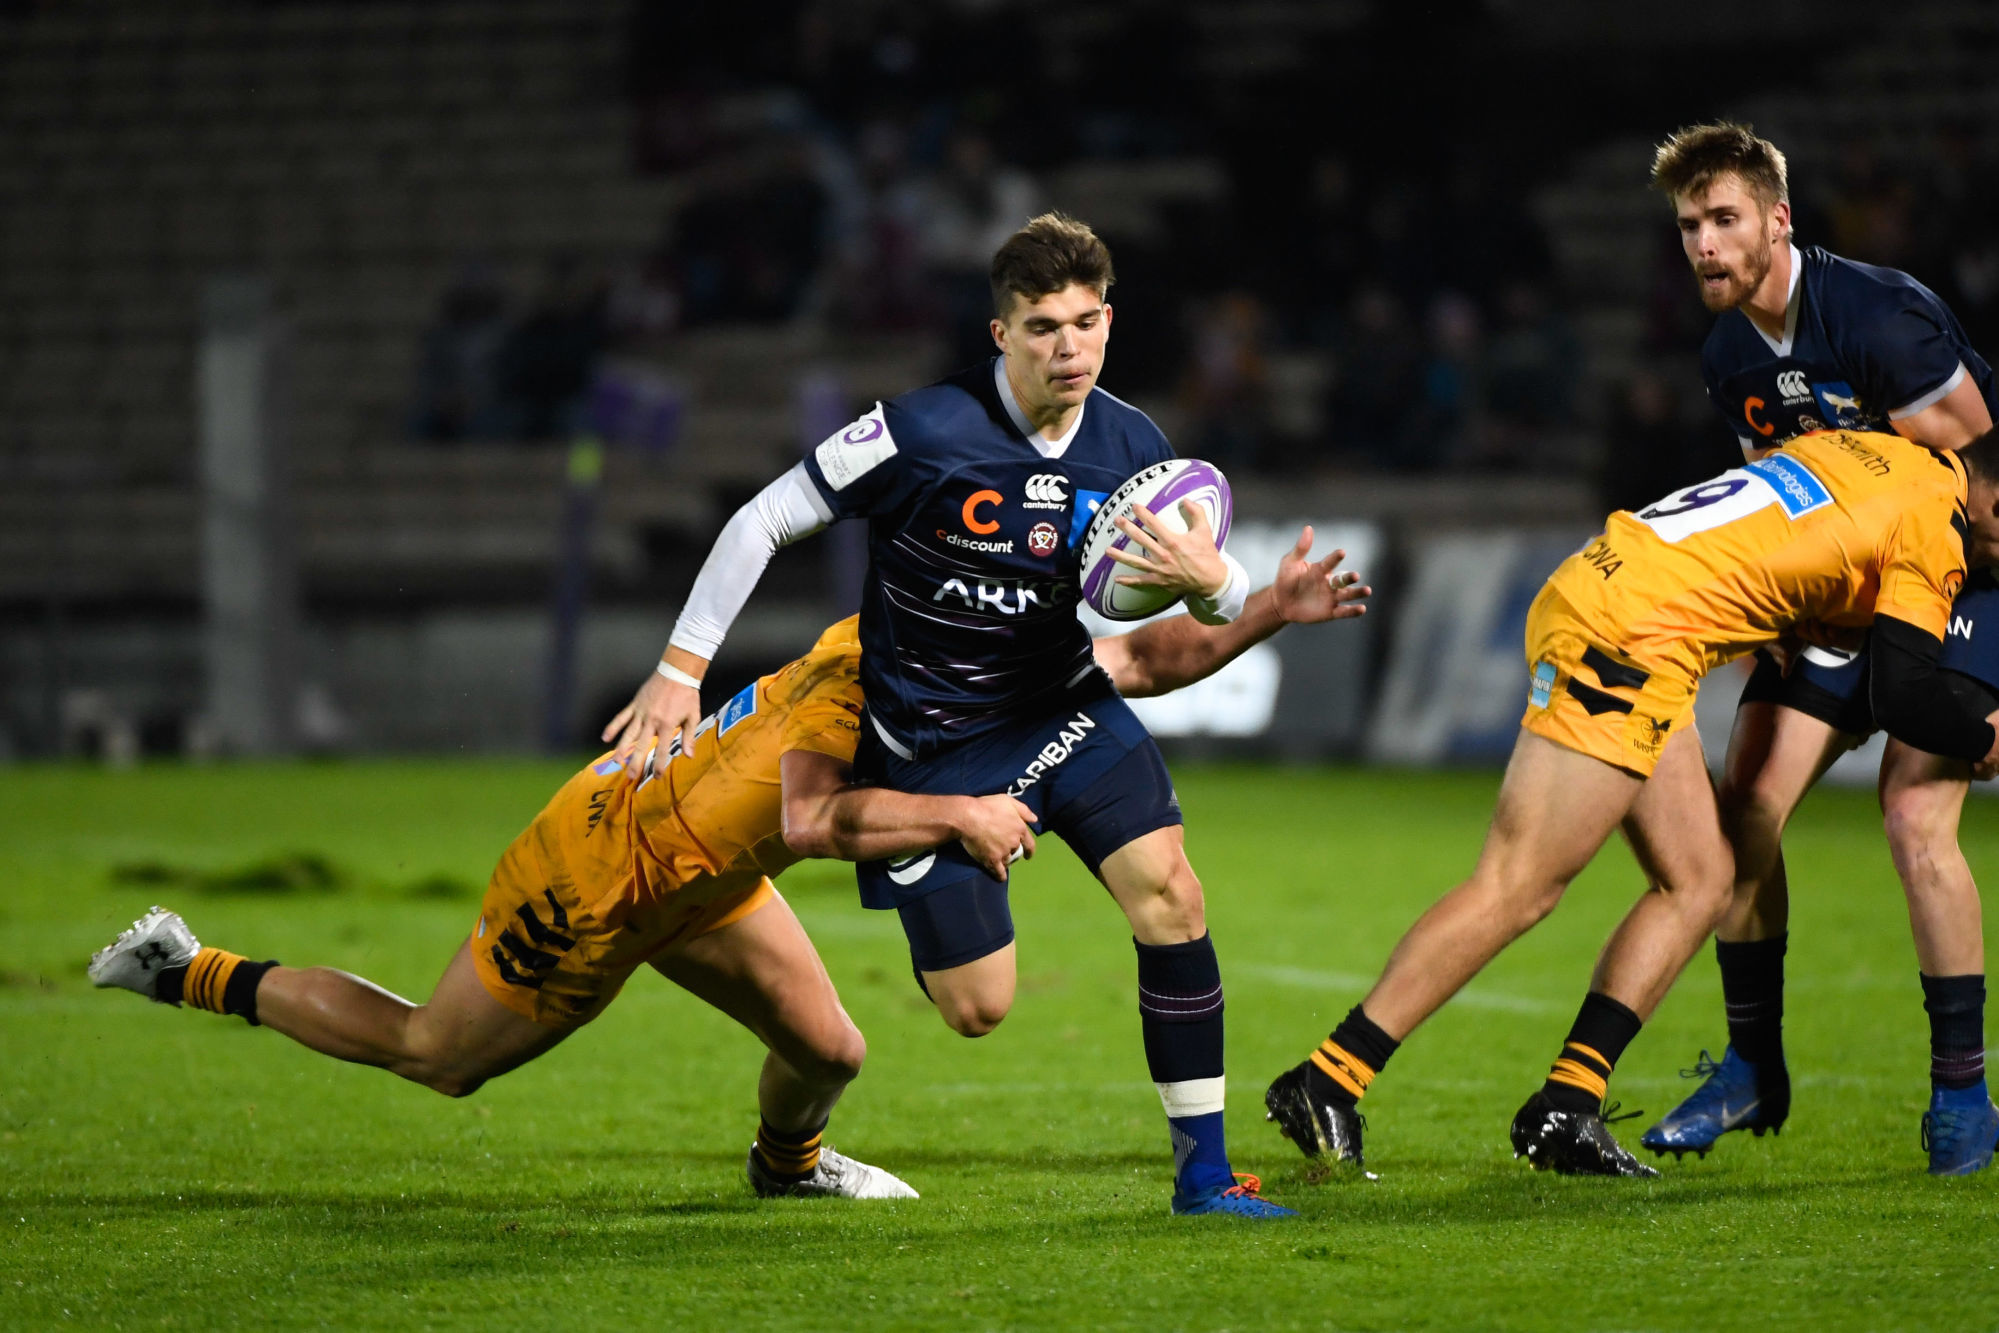 Matthieu JALIBERT of Bordeaux during the European Rugby Challenge Cup, Pool 3 match between Bordeaux and Wasps on November 16, 2019 in Begles, France. (Photo by Julien Crosnier/Icon Sport) - Stade Andre Moga - Begles (France)